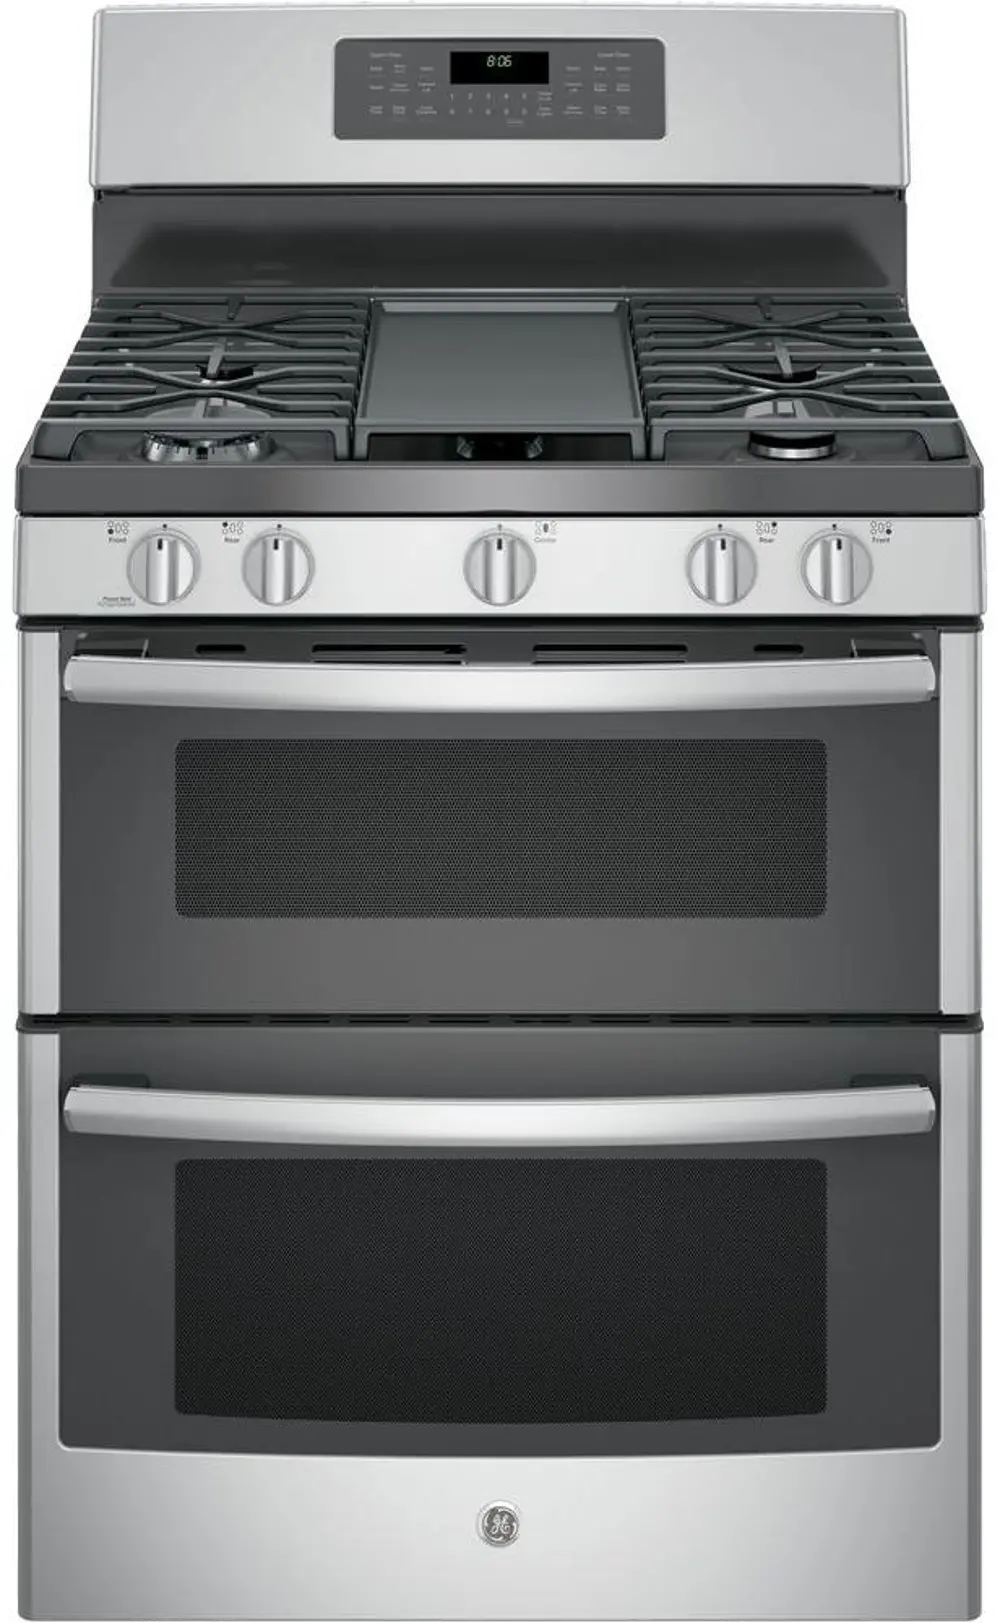 JGB860SEJSS GE Double Oven Gas Range - 6.8 cu. ft. Stainless Steel-1